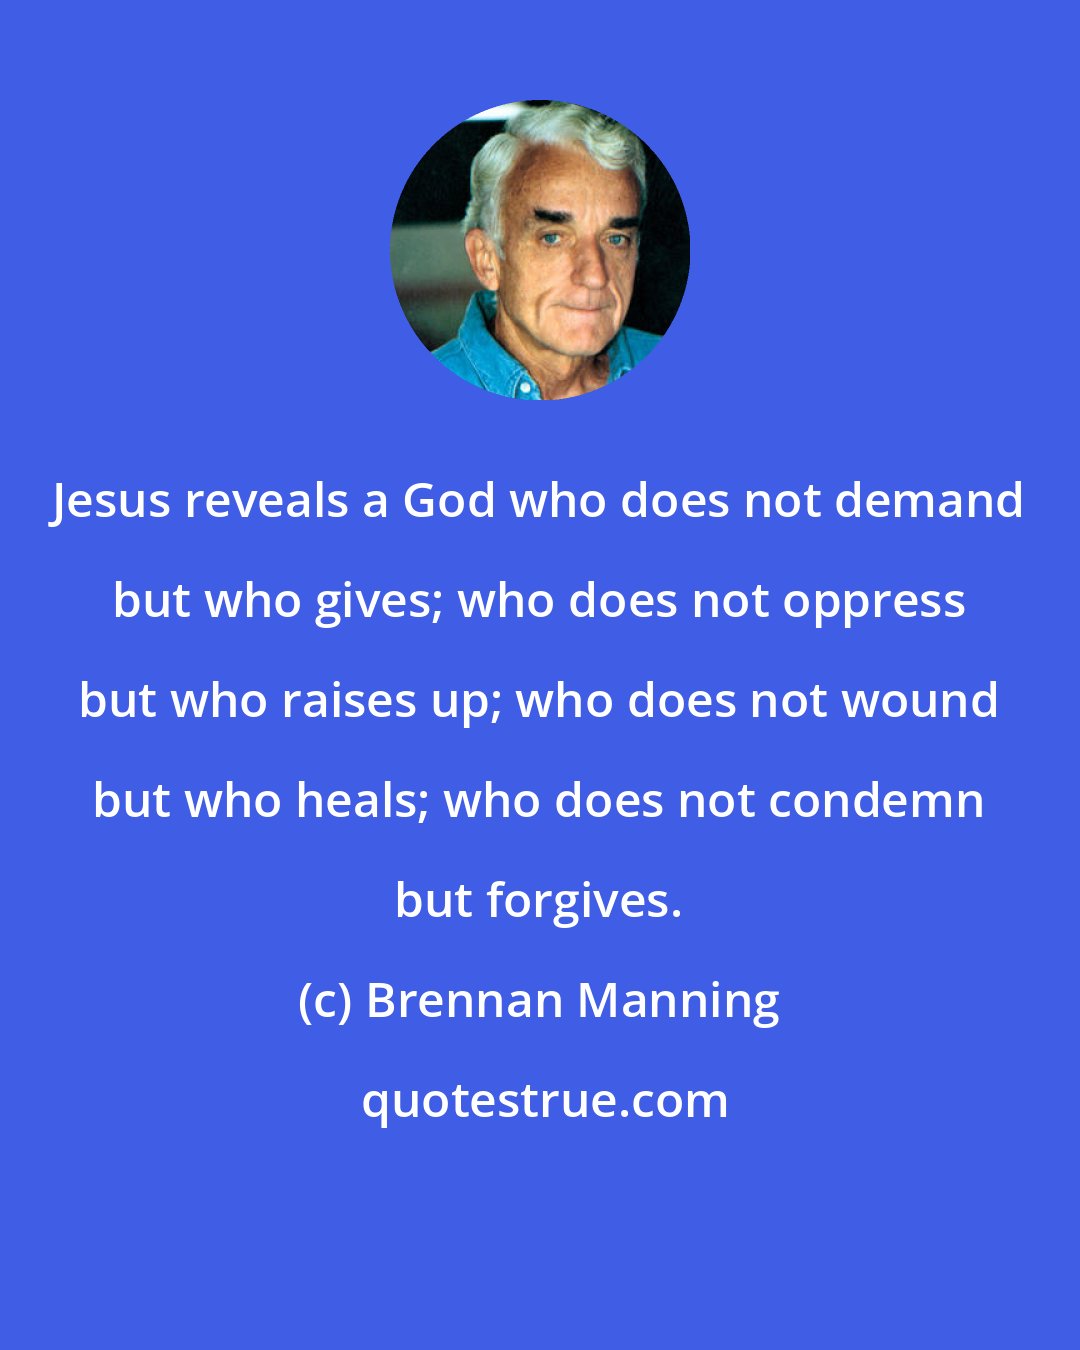 Brennan Manning: Jesus reveals a God who does not demand but who gives; who does not oppress but who raises up; who does not wound but who heals; who does not condemn but forgives.